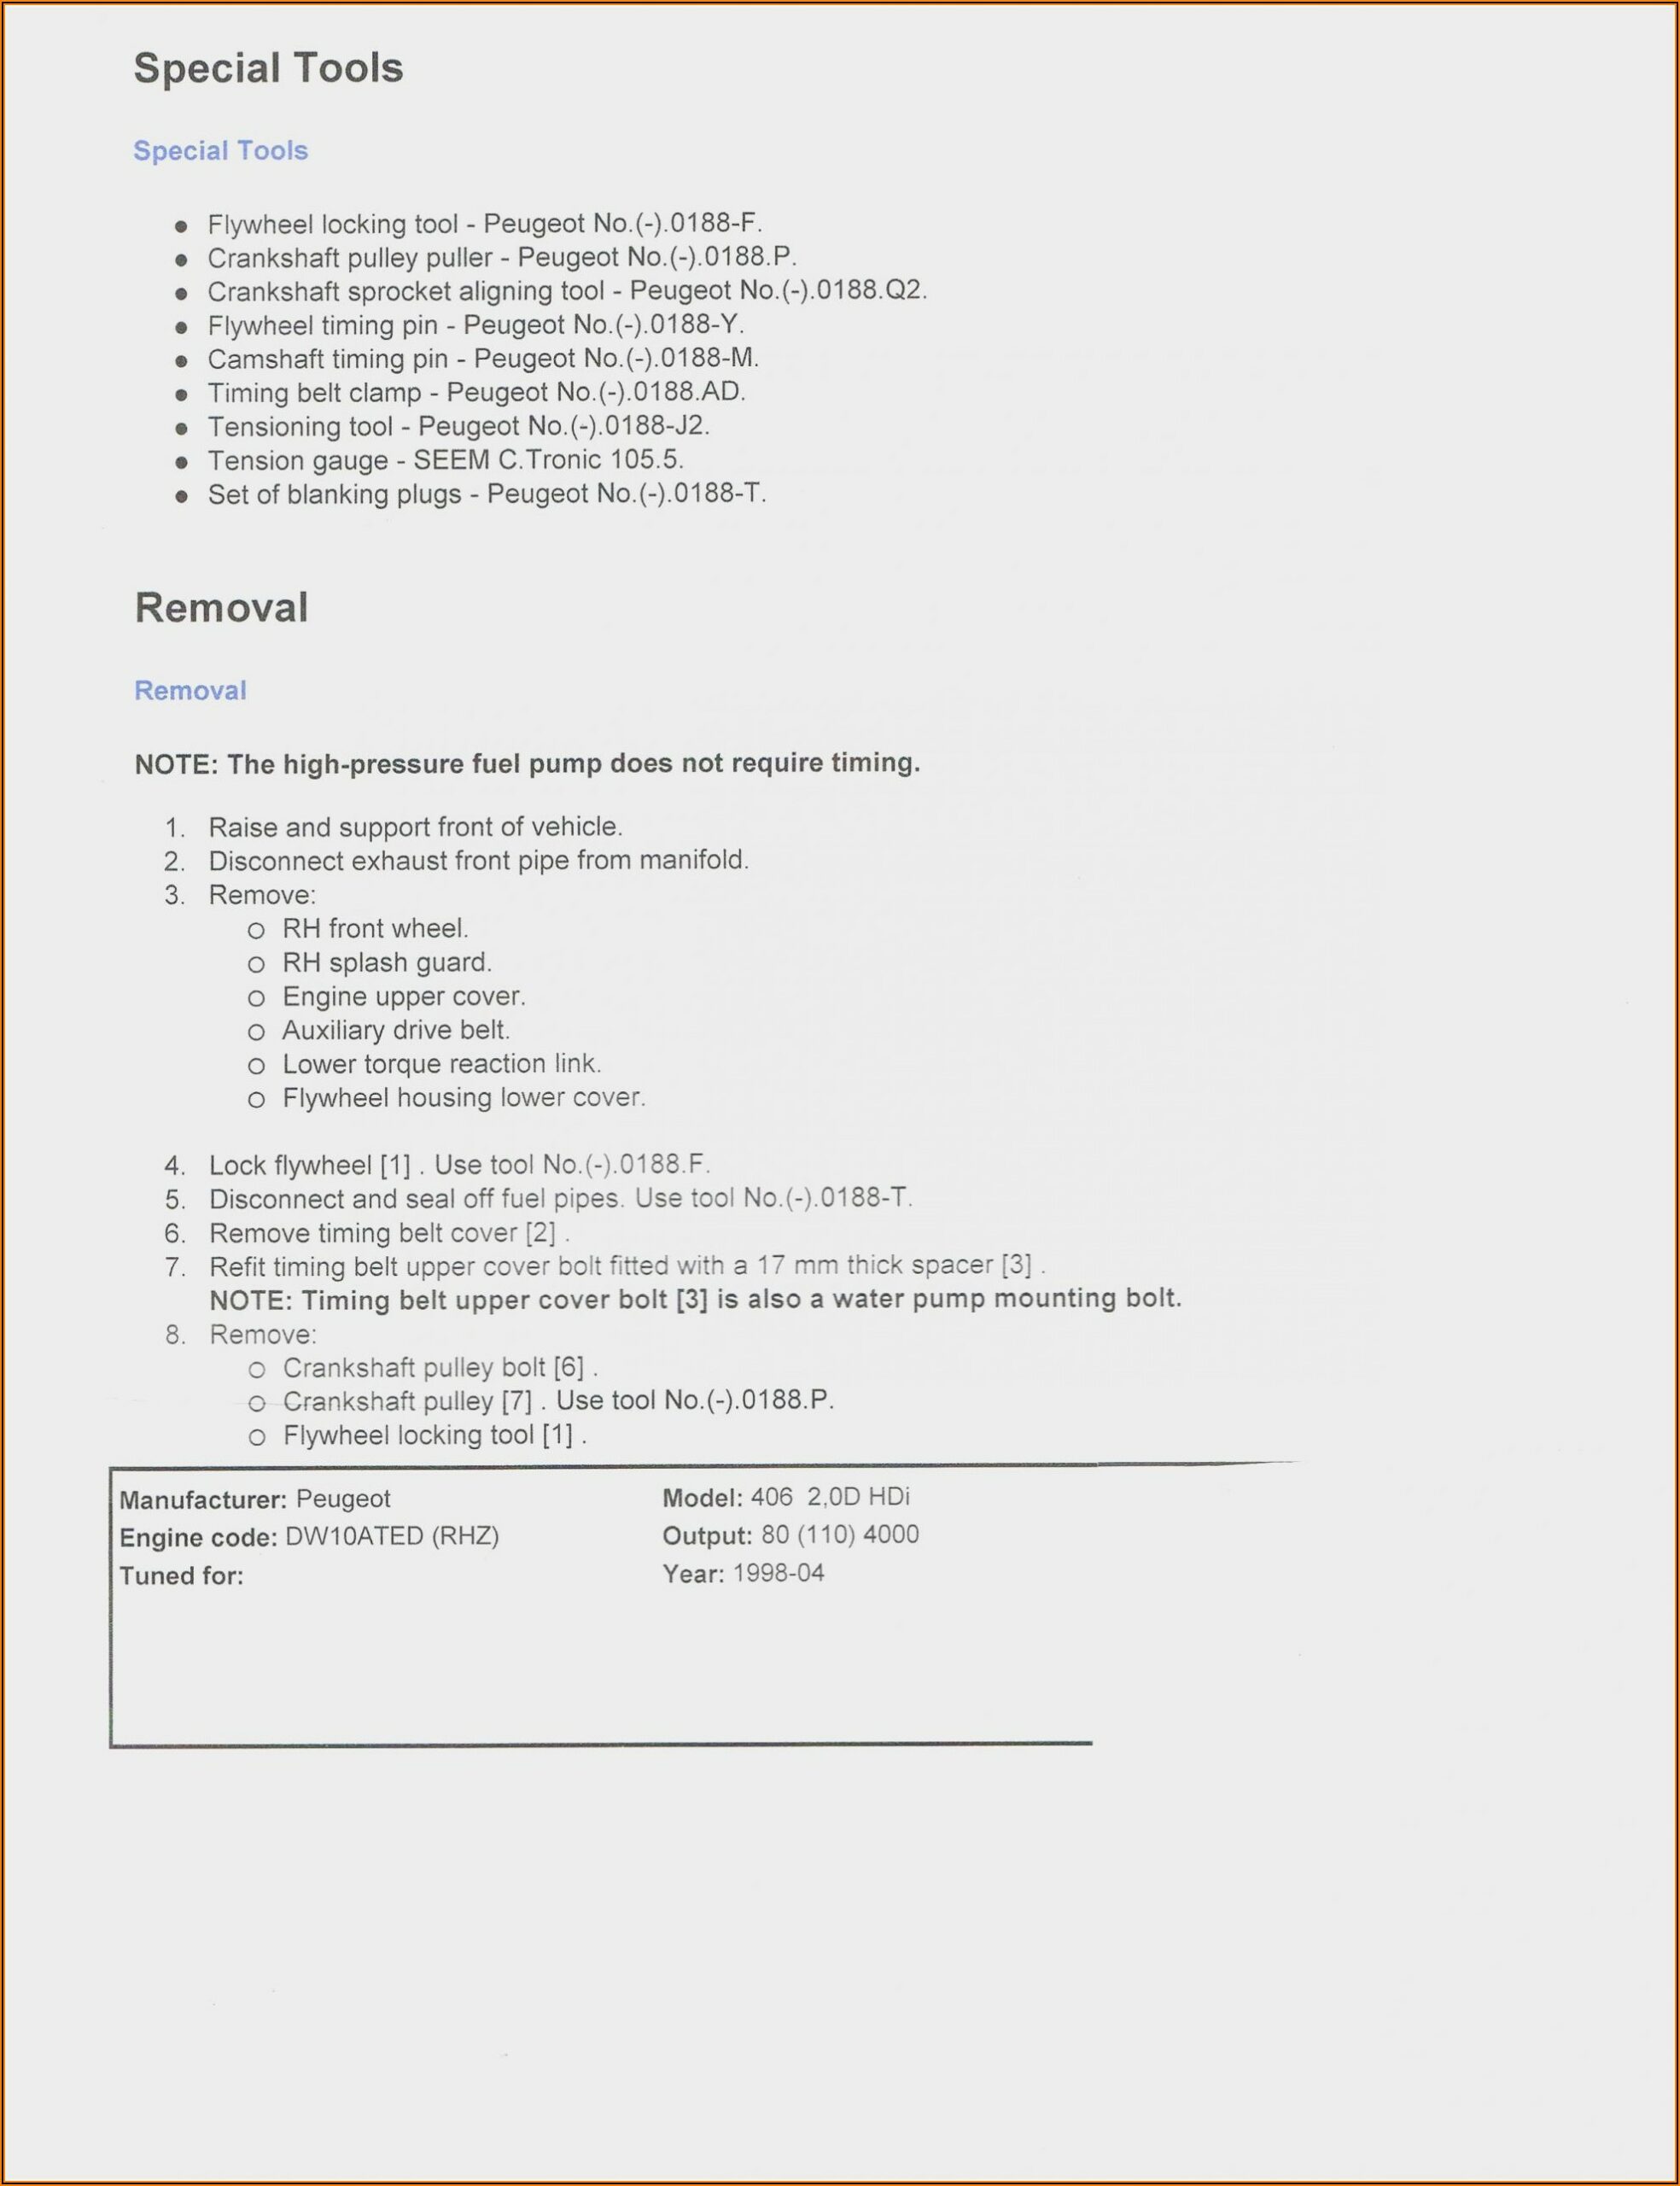 Ms Word Creative Resume Template Free Download